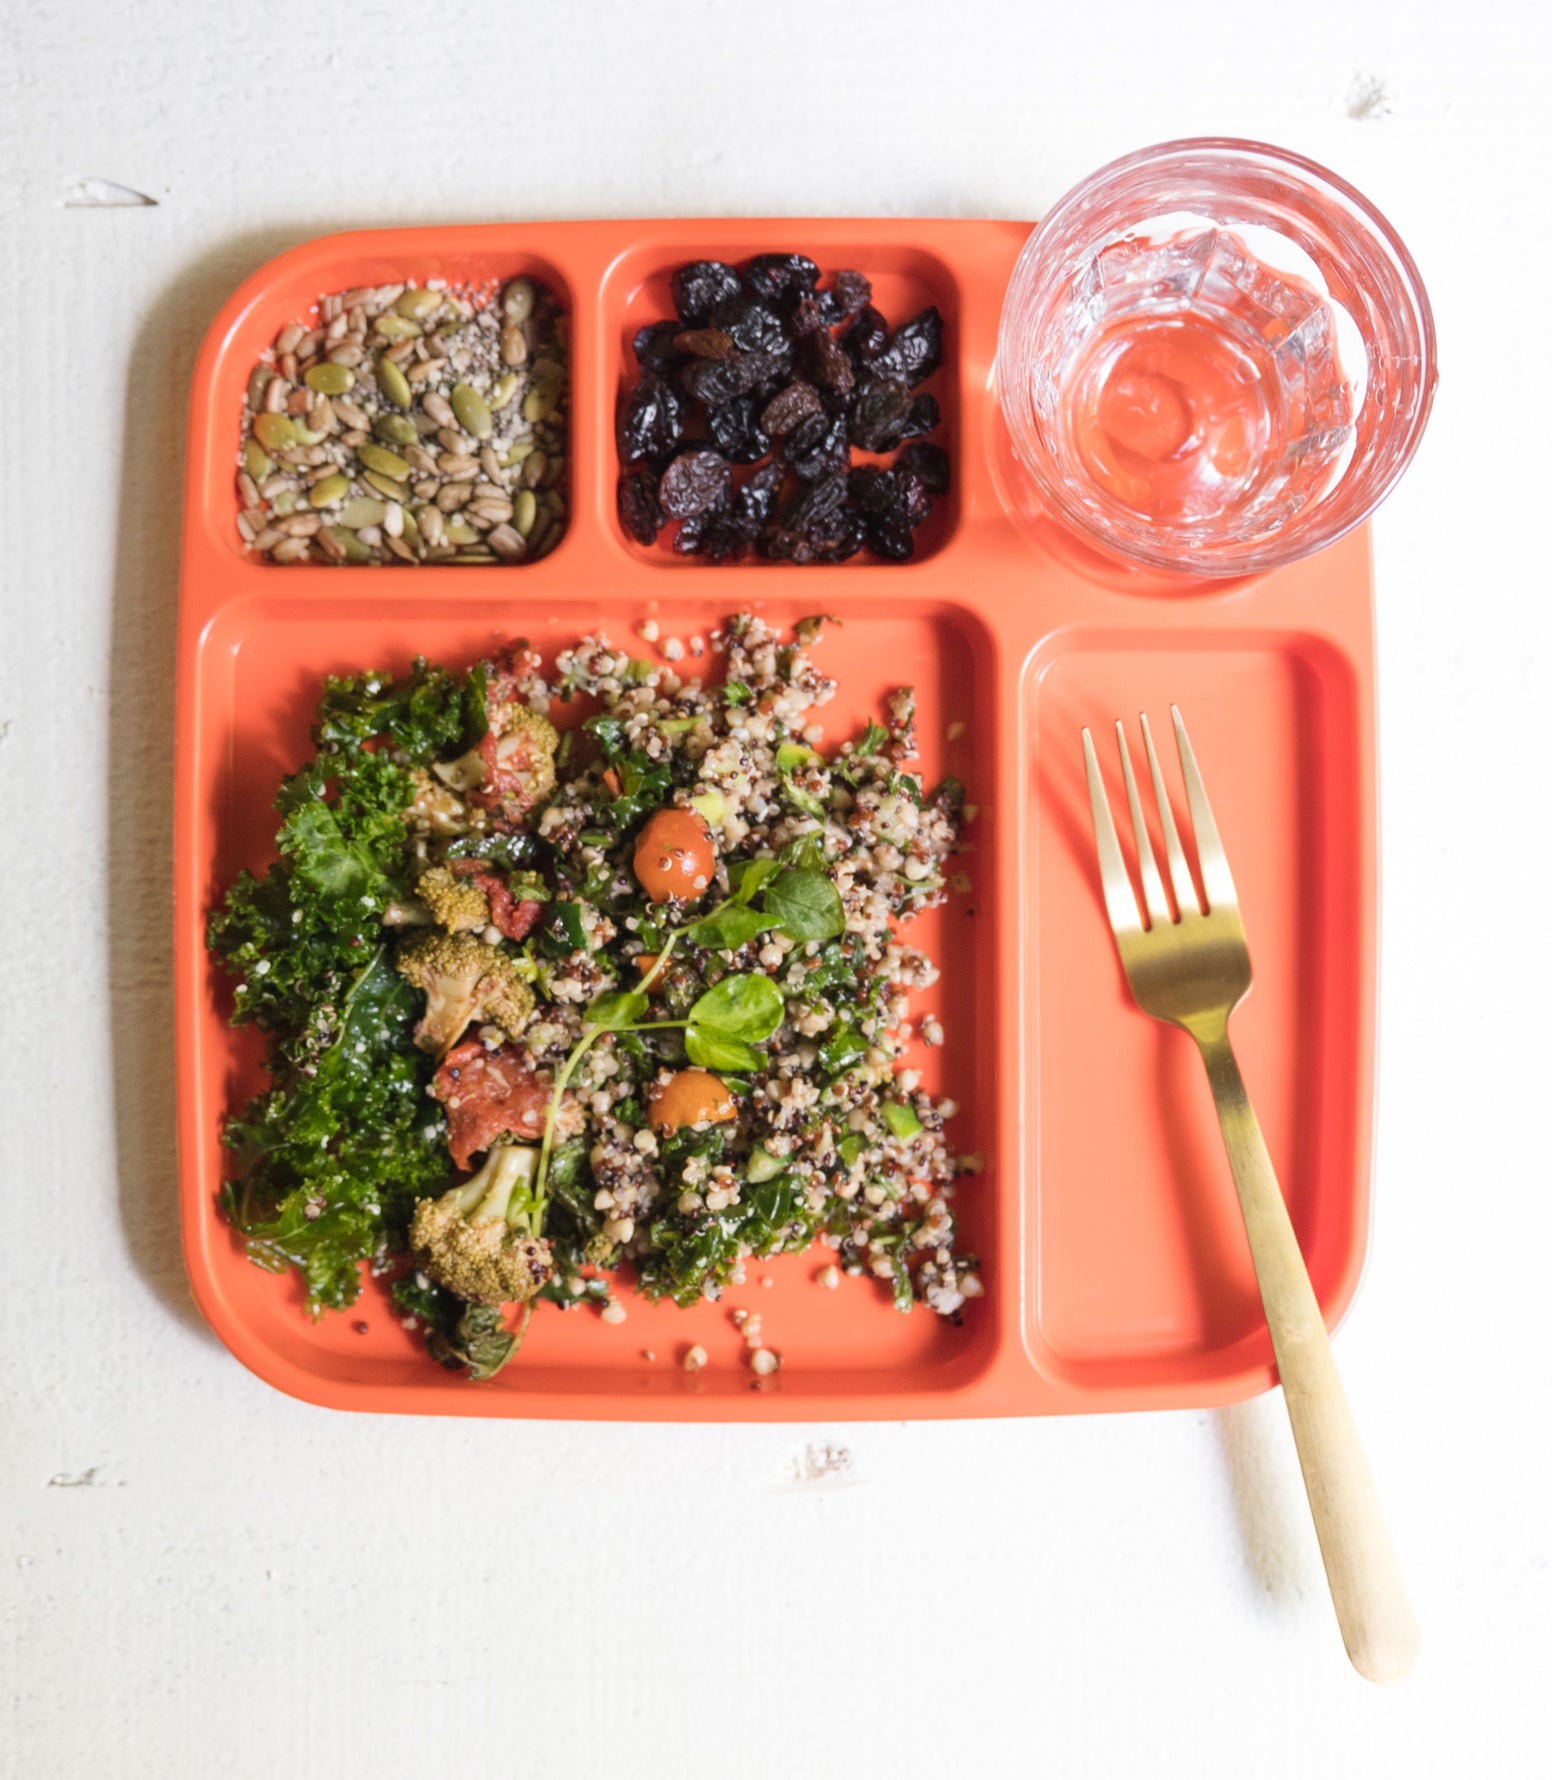 Healthy School Lunch is Back on the Menu! Welcome Back, Bhakti Bowls!